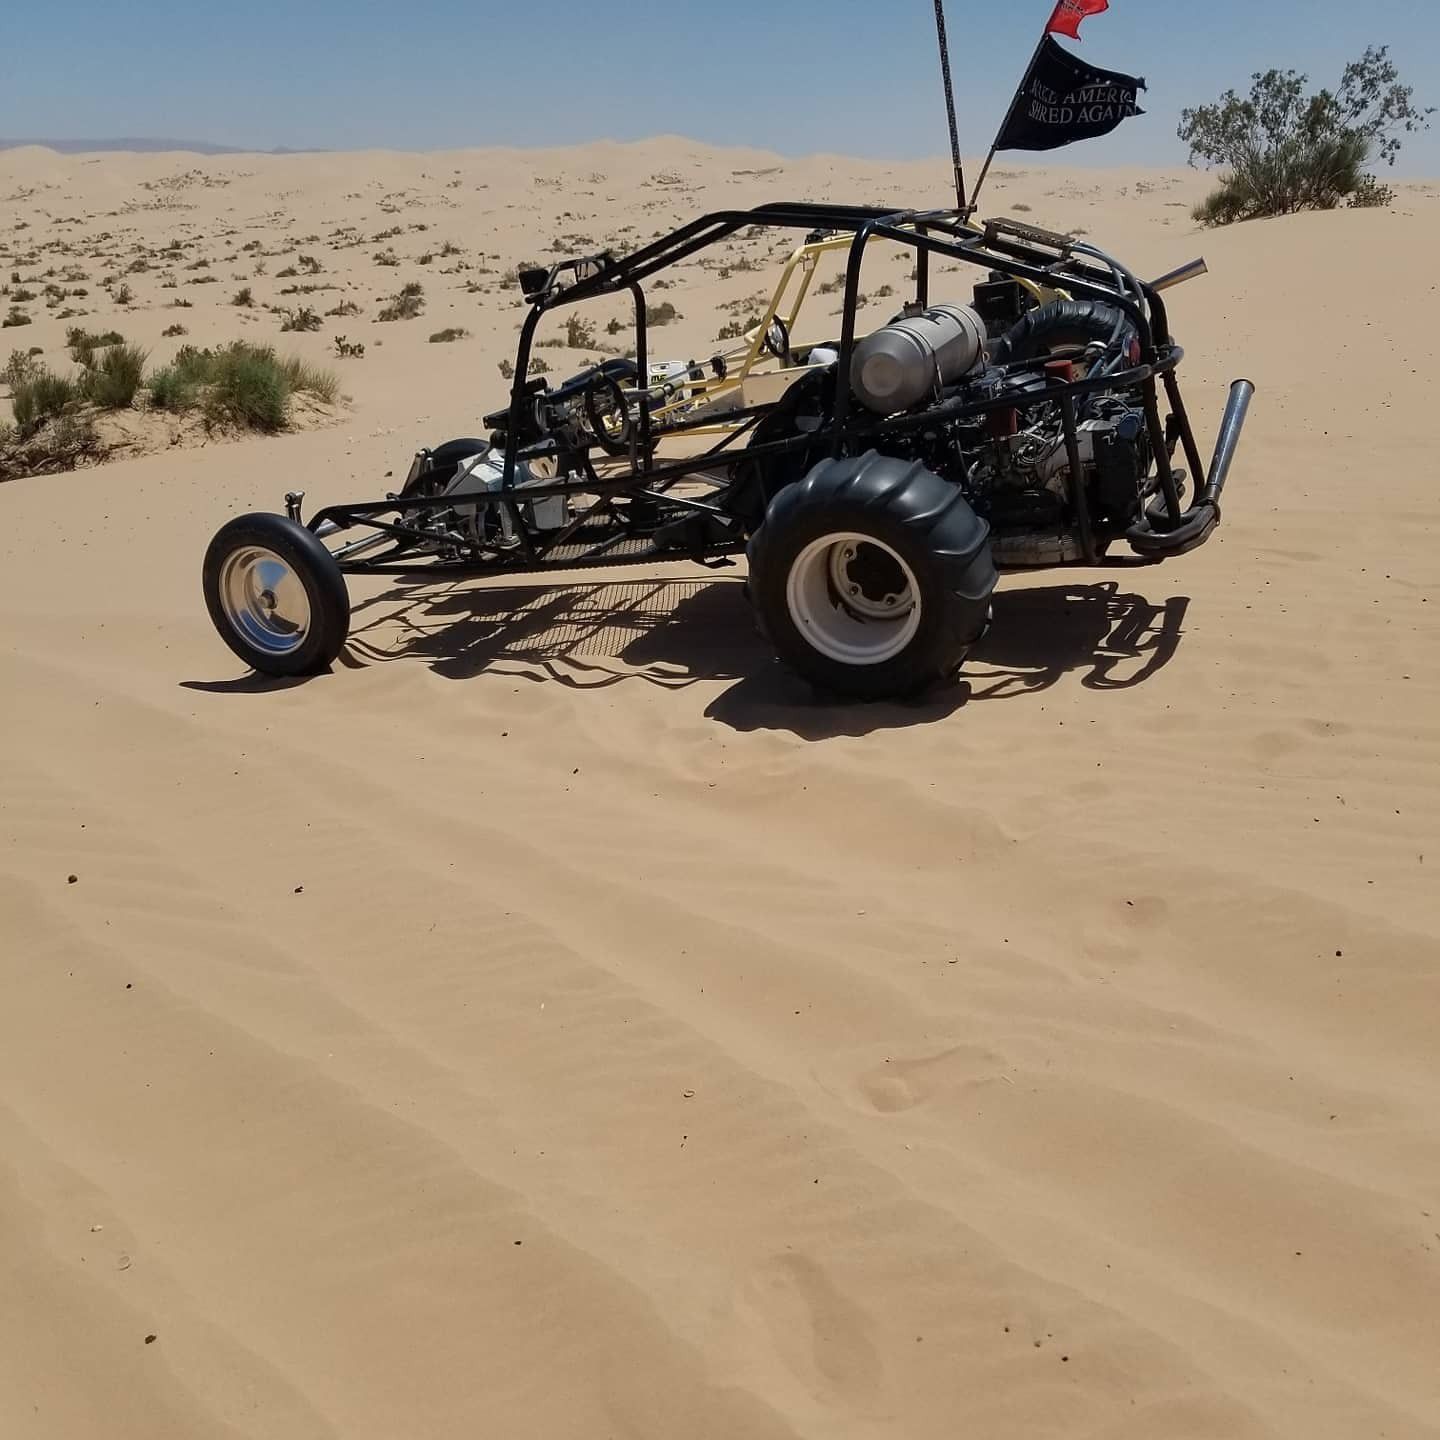 Dune buggy, Need gone this weekend